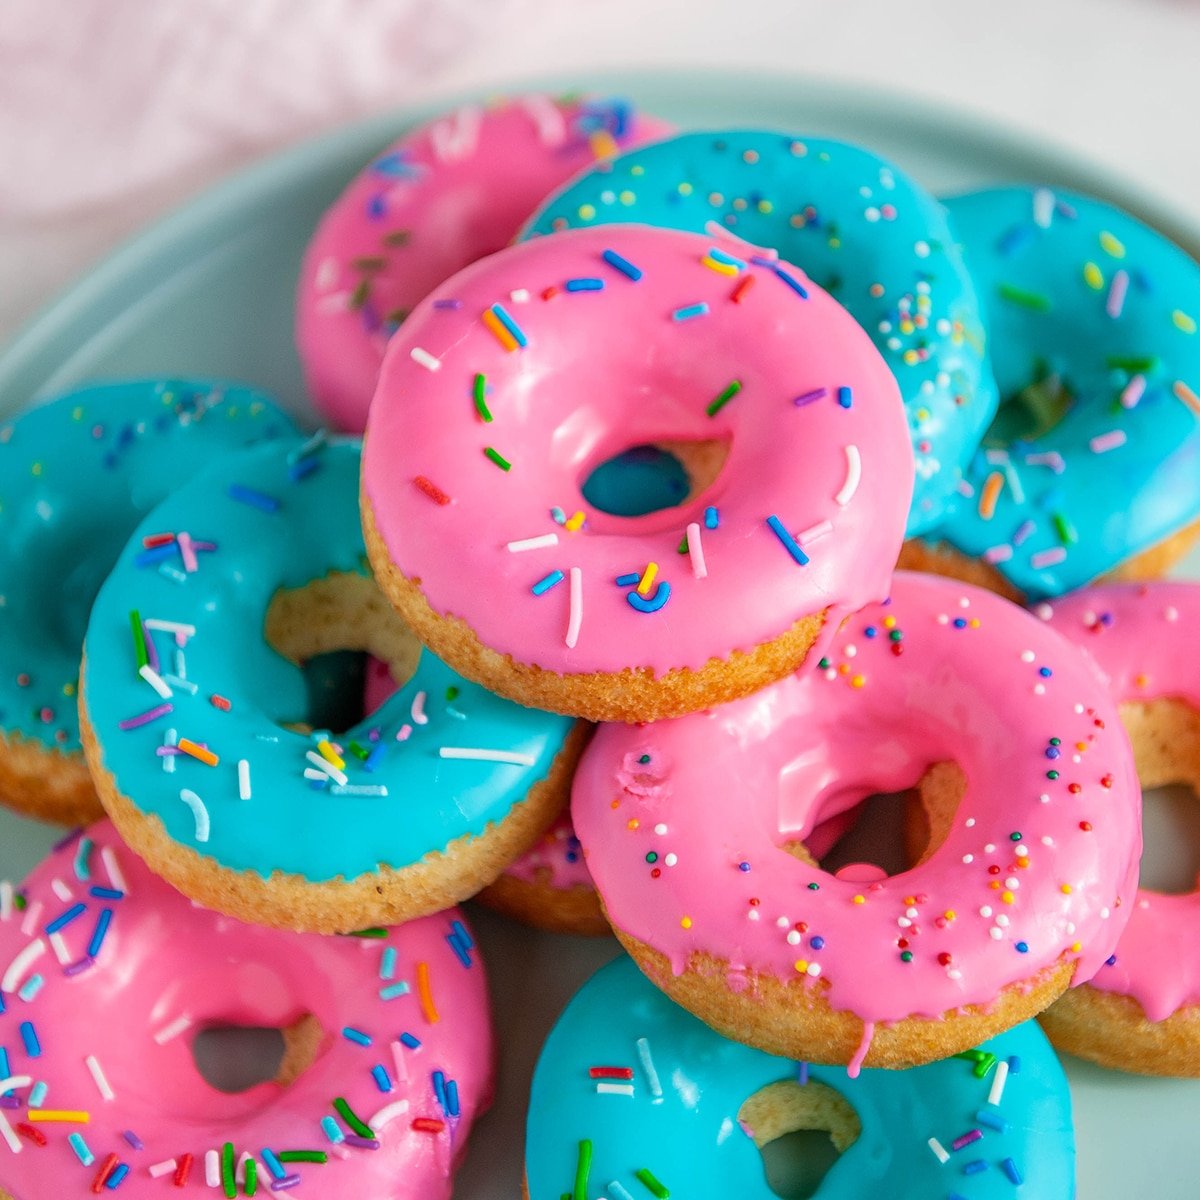 baked donuts with pink and blue glaze and sprinkles